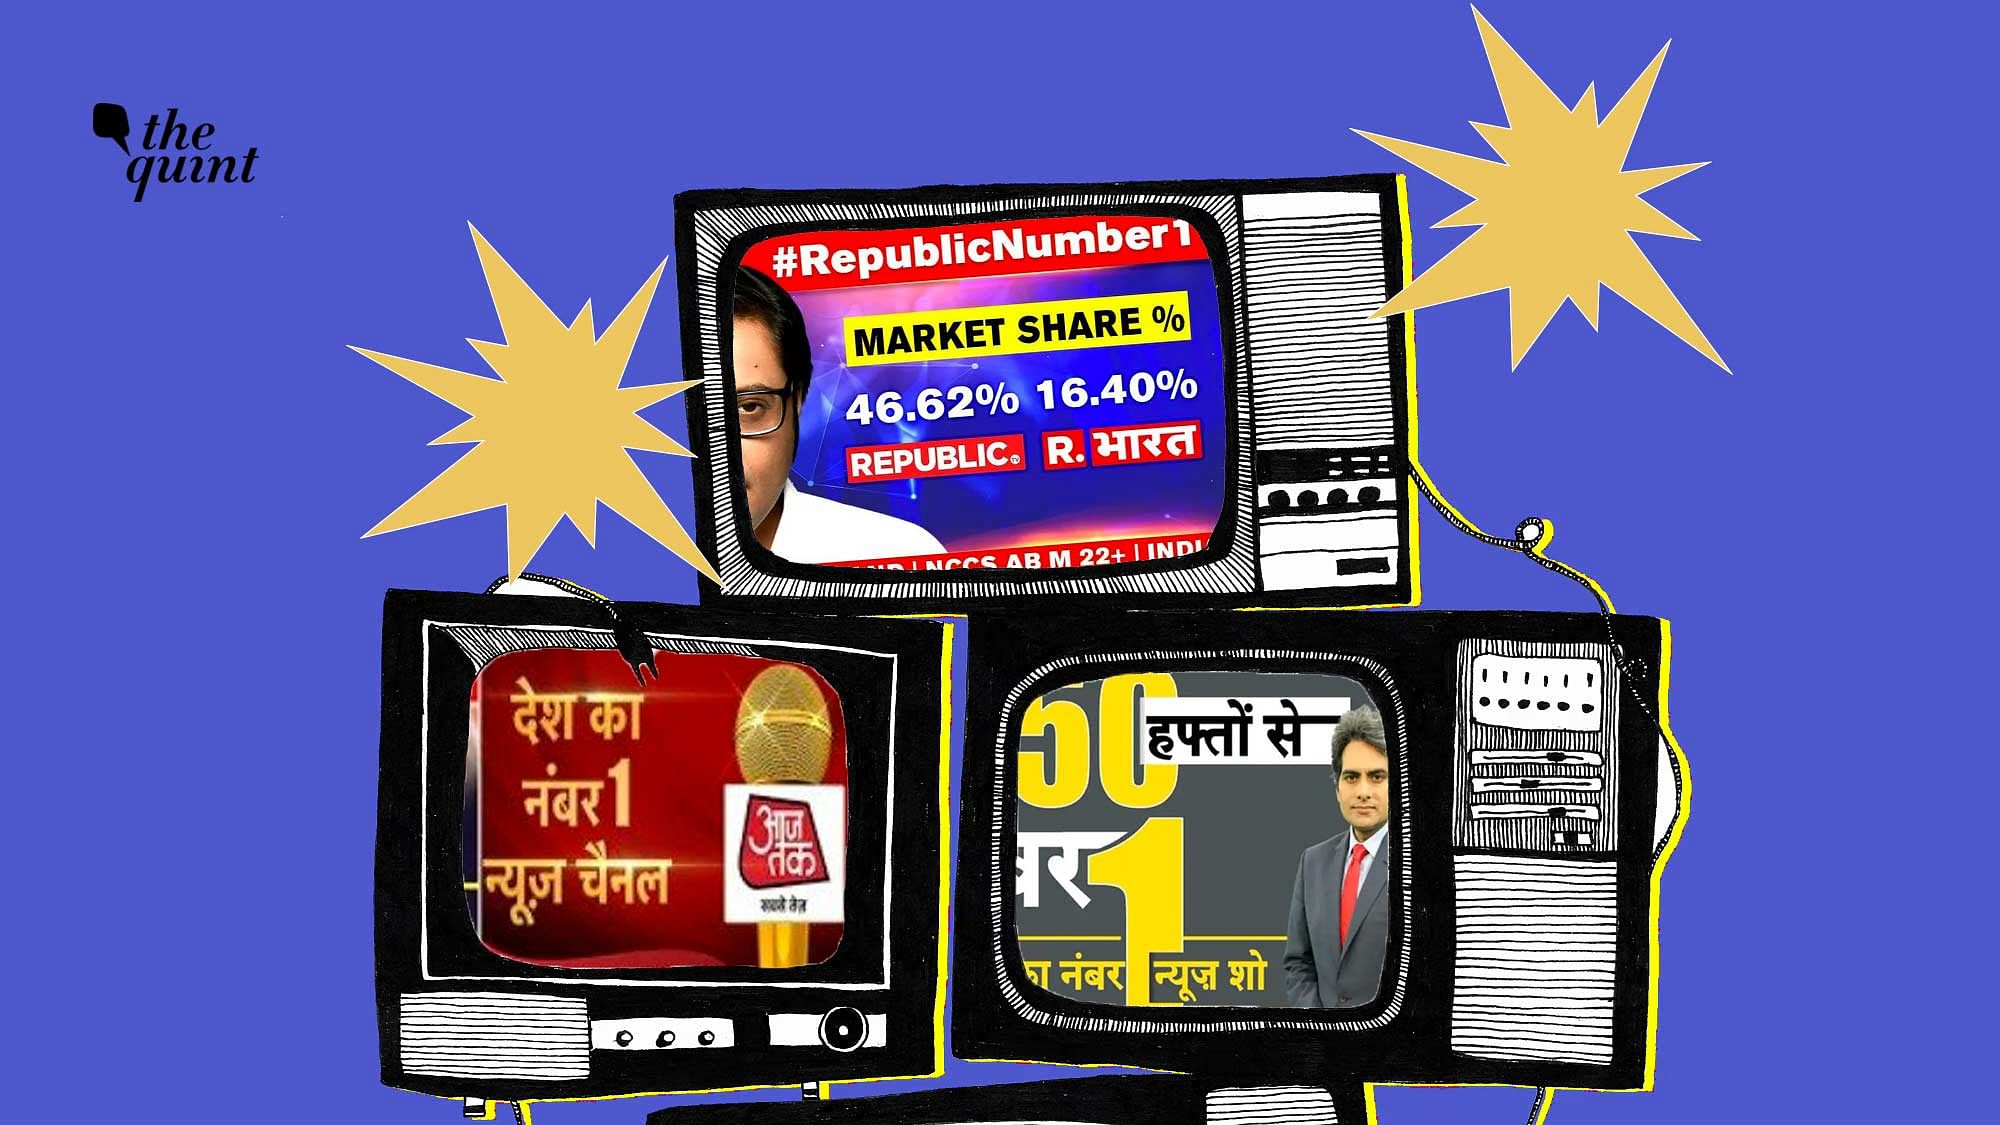 The alleged “TRP scam” revealed by the Mumbai Police has sparked a debate regarding the media industry in India.